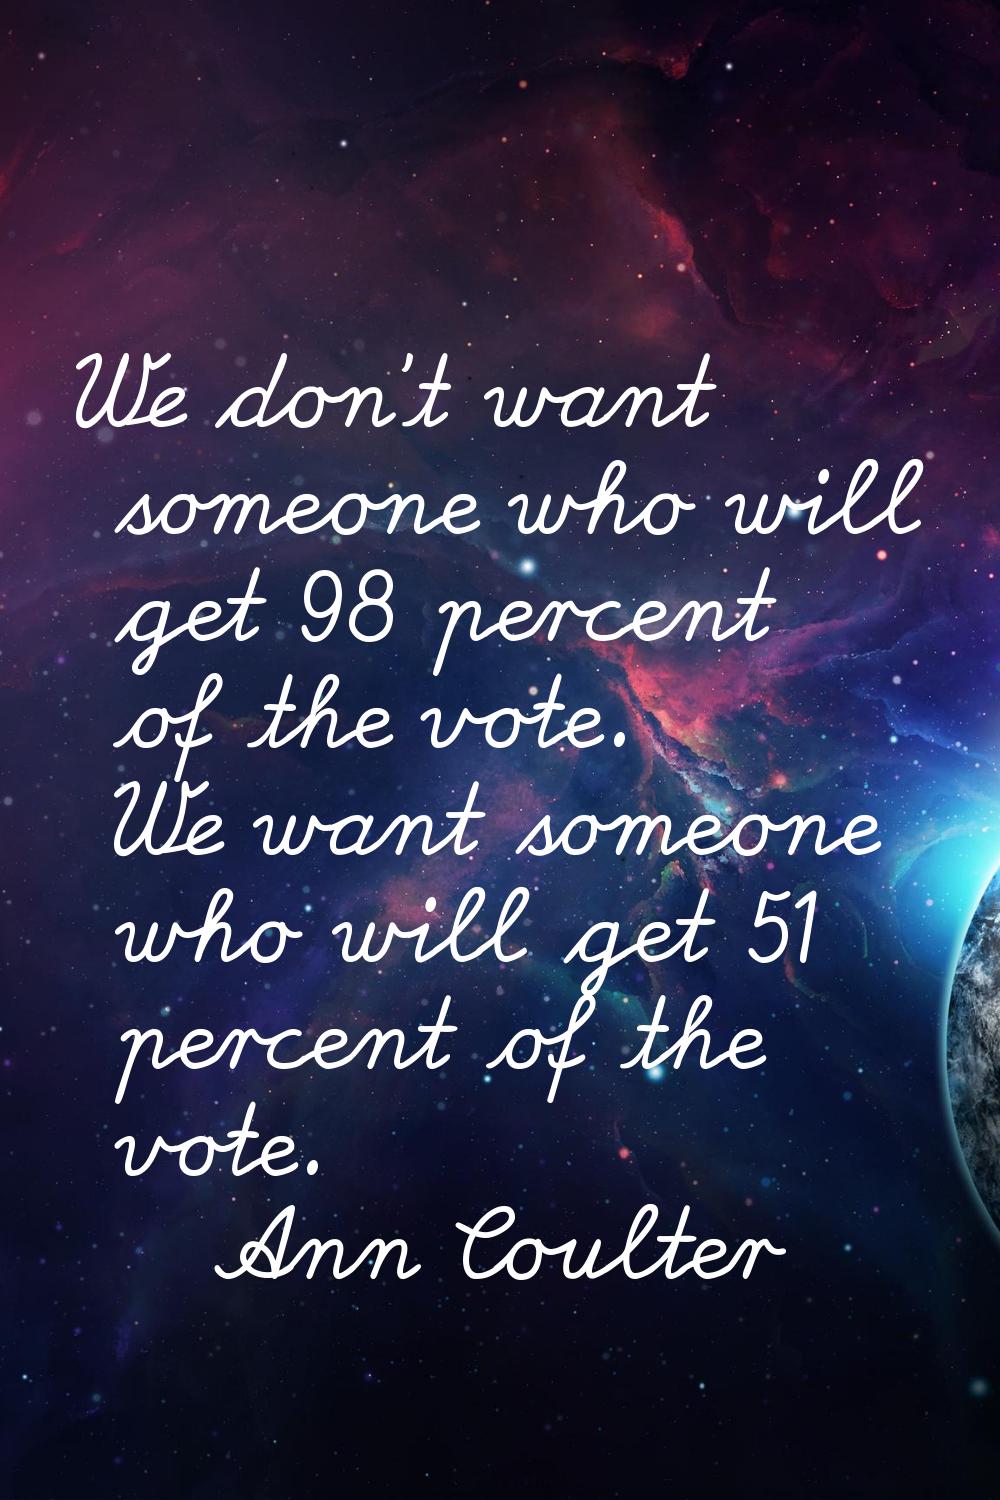 We don't want someone who will get 98 percent of the vote. We want someone who will get 51 percent 